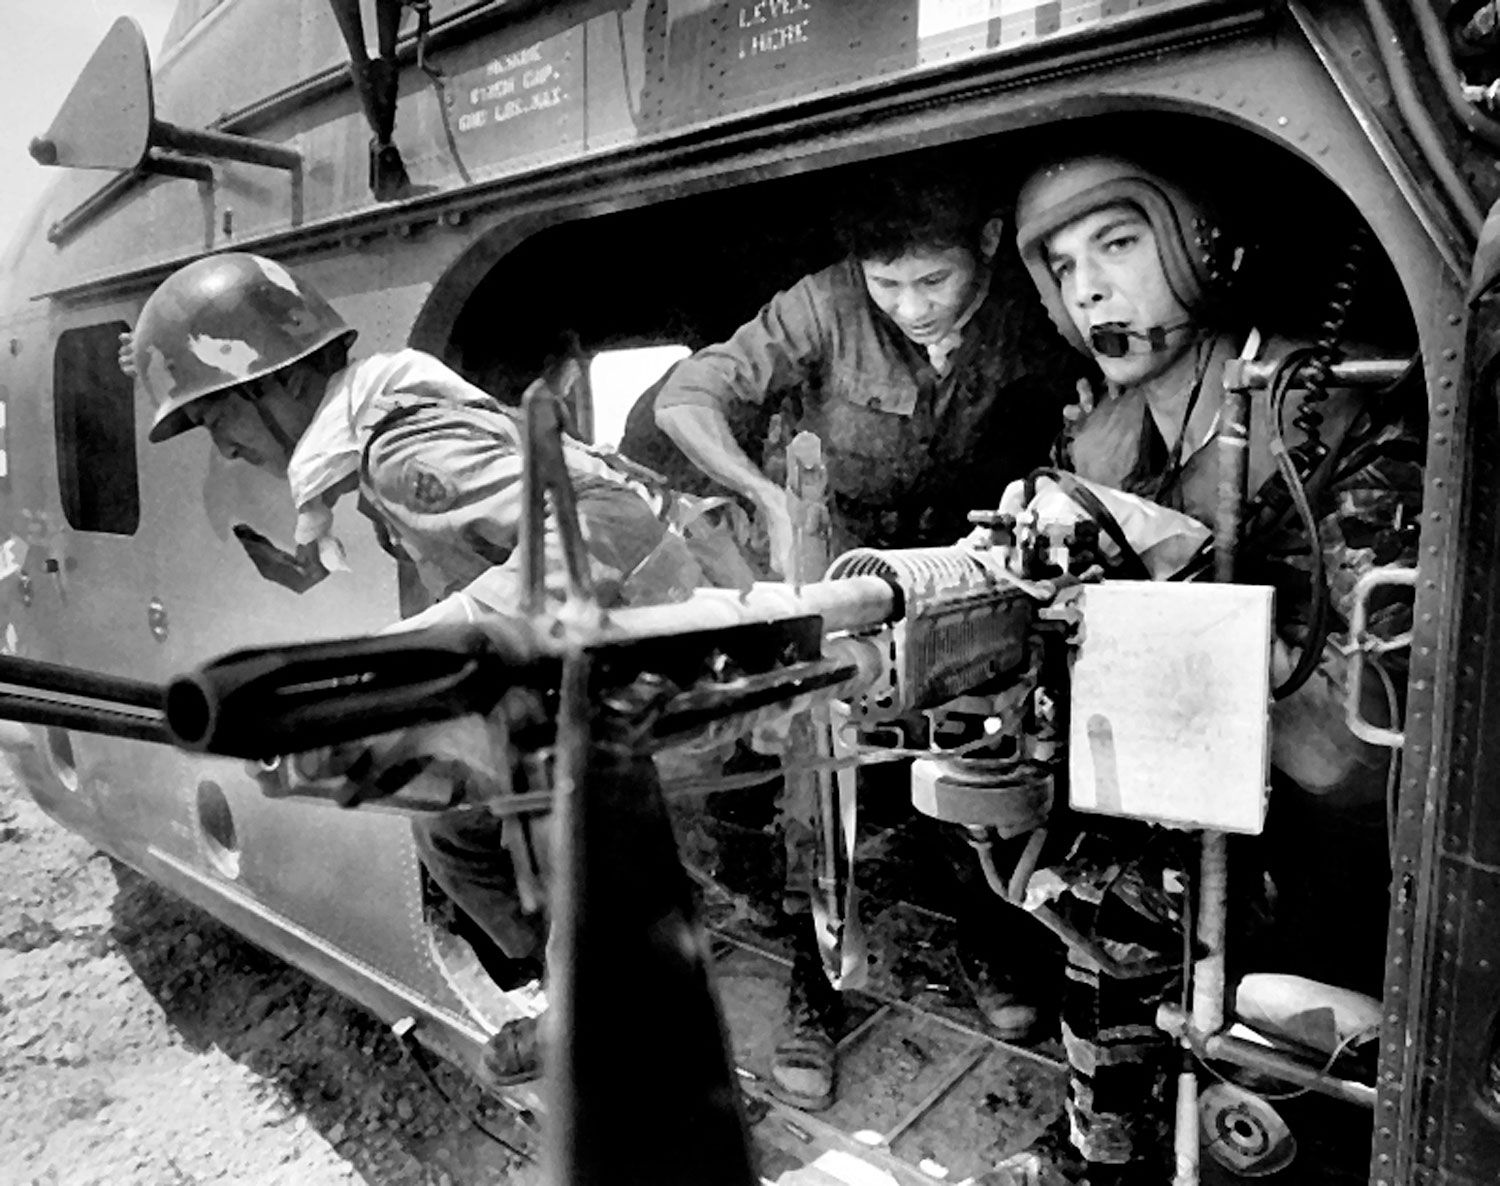 One Ride With Yankee Papa 13': A Classic Photo Essay From Vietnam | Time